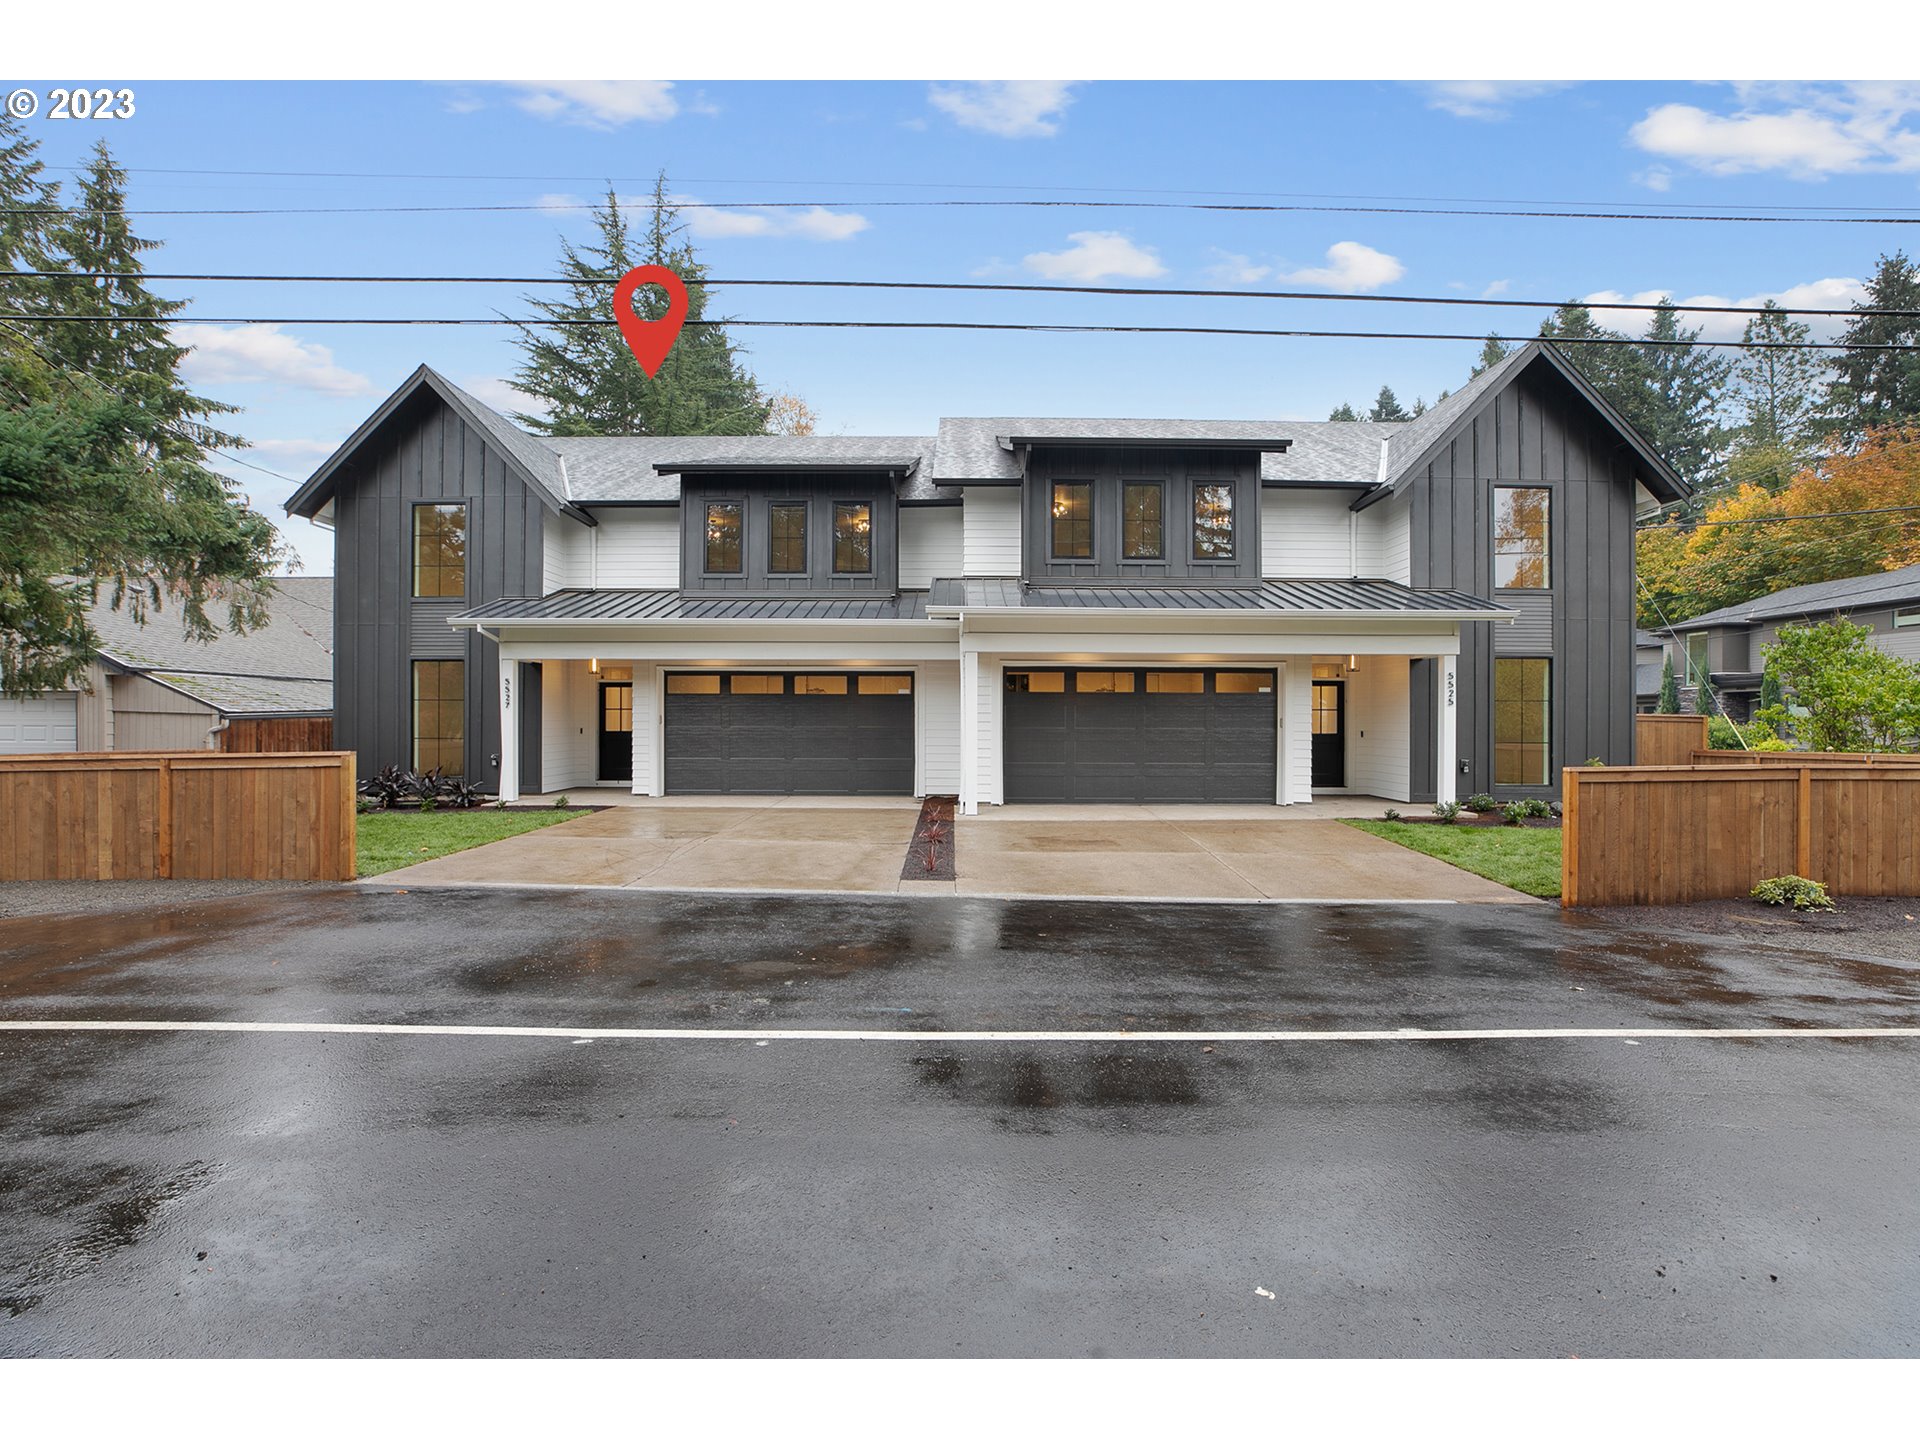 5527 CHILDS RD, Lake Oswego, OR 